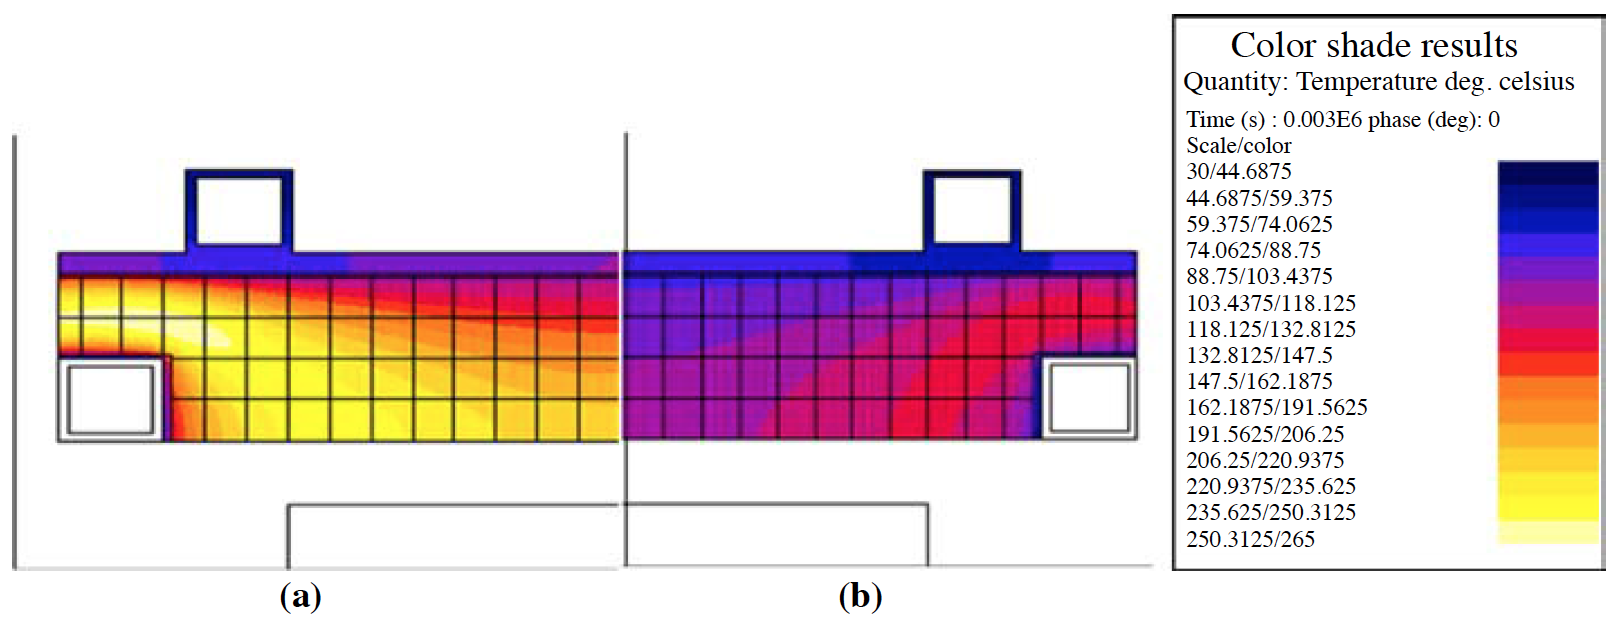 Fluxtrol | Design of Induction Coil For Generating Magnetic Field For Cancer Hyperthermia Research - Figure 6: Flux 2D thermal simulation of the concentrator using a plate of Fluxtrol 50 (a) and oriented pieces of Fluxtrol 75 (b)